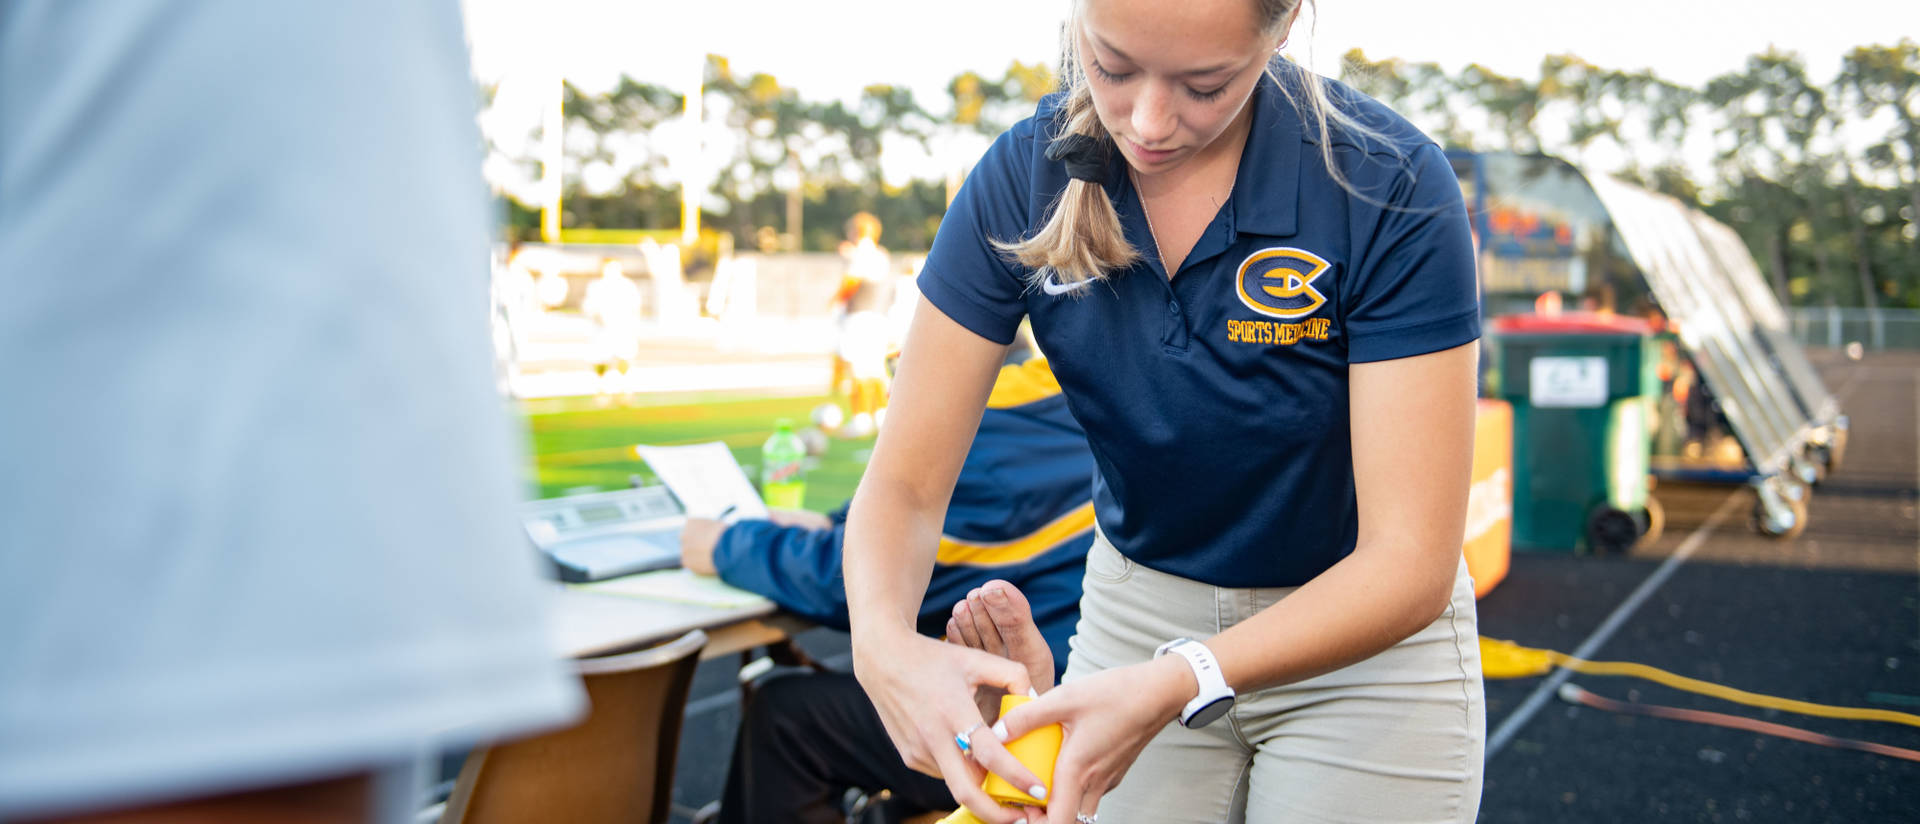 Student taping an ankle during a UWEC soccer game